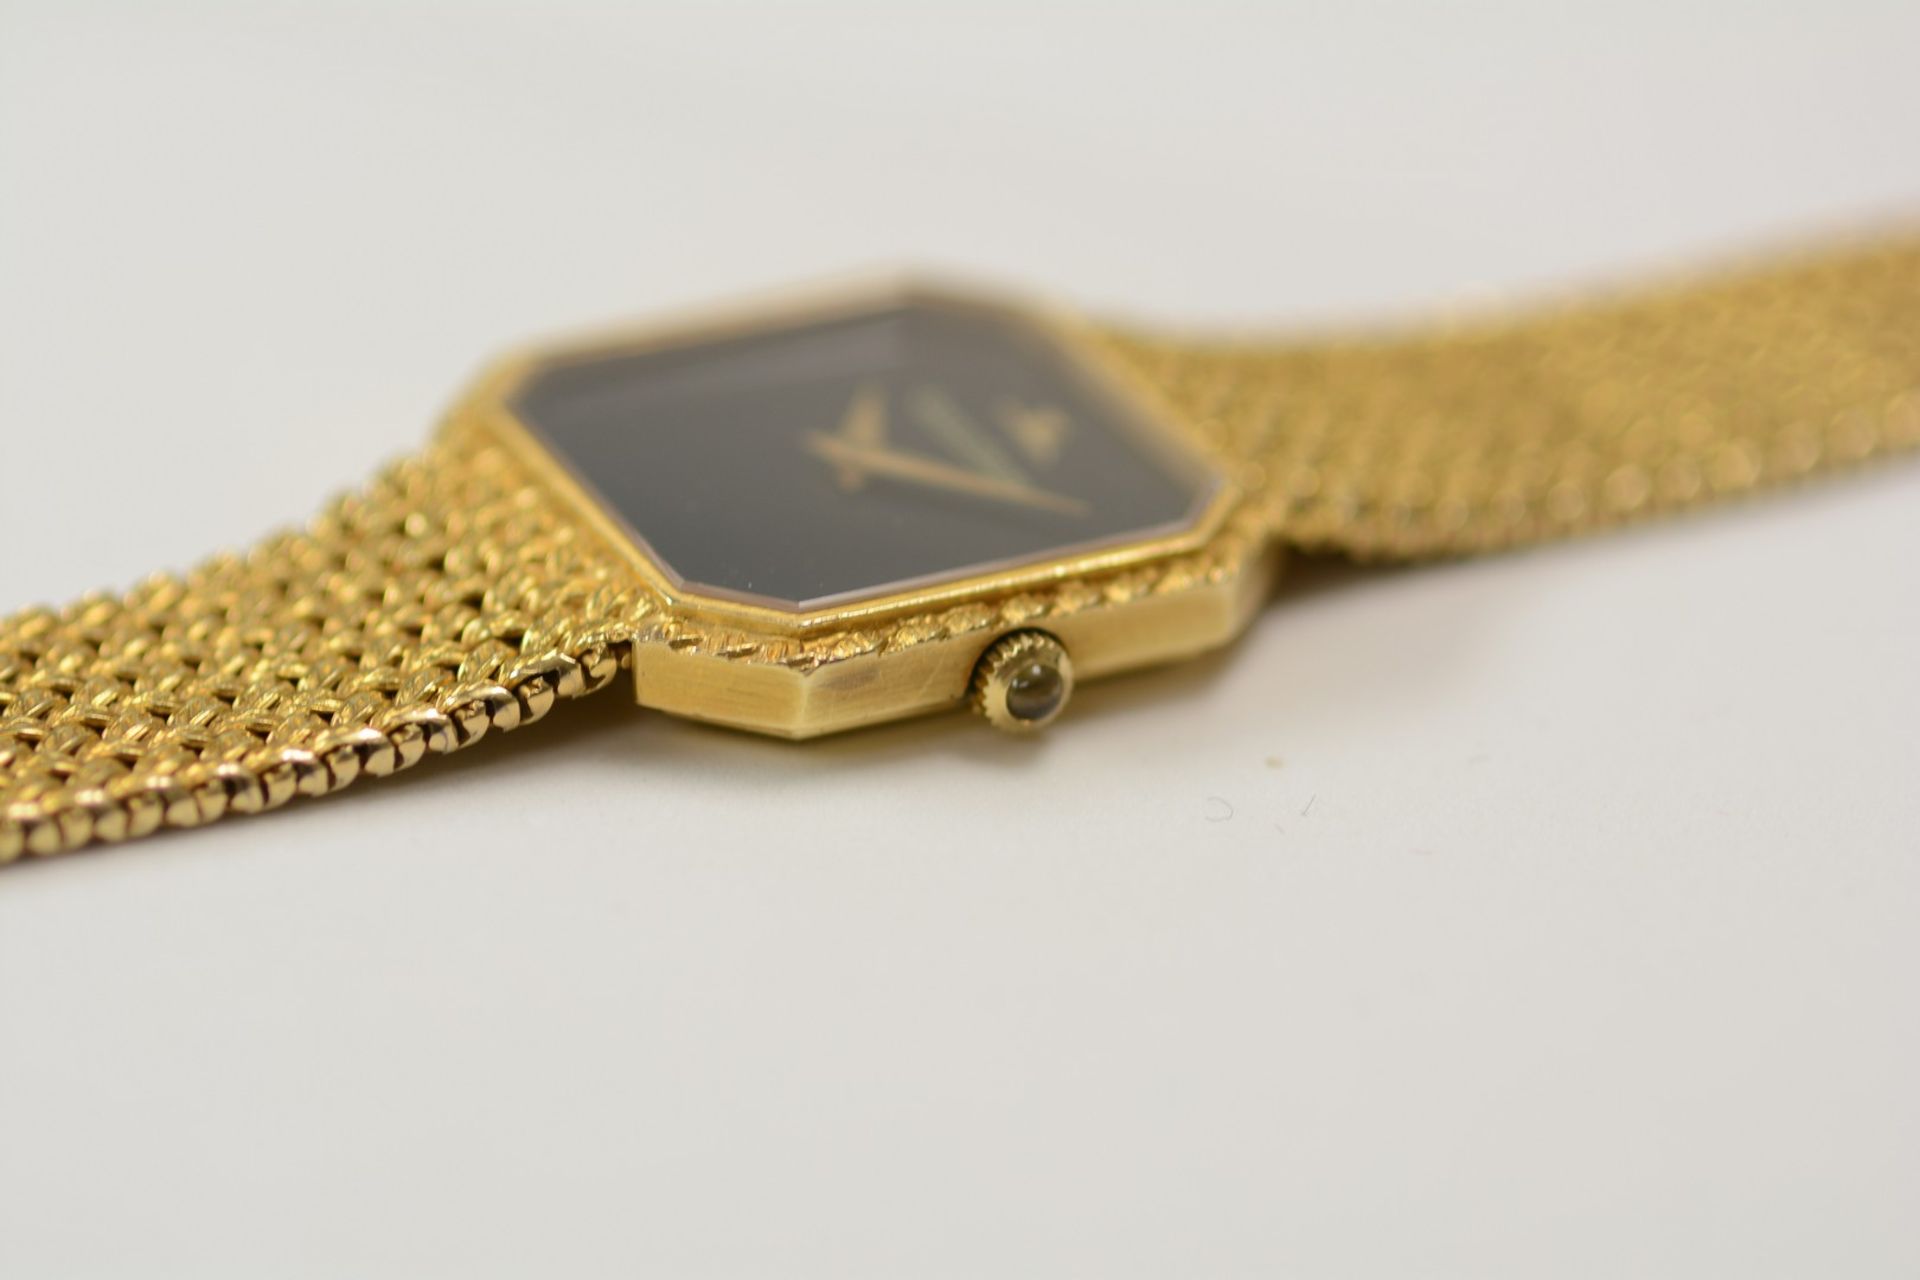 Jaeger-LeCoultre / Vintage - Unisex Yellow gold Wrist Watch - Image 9 of 14